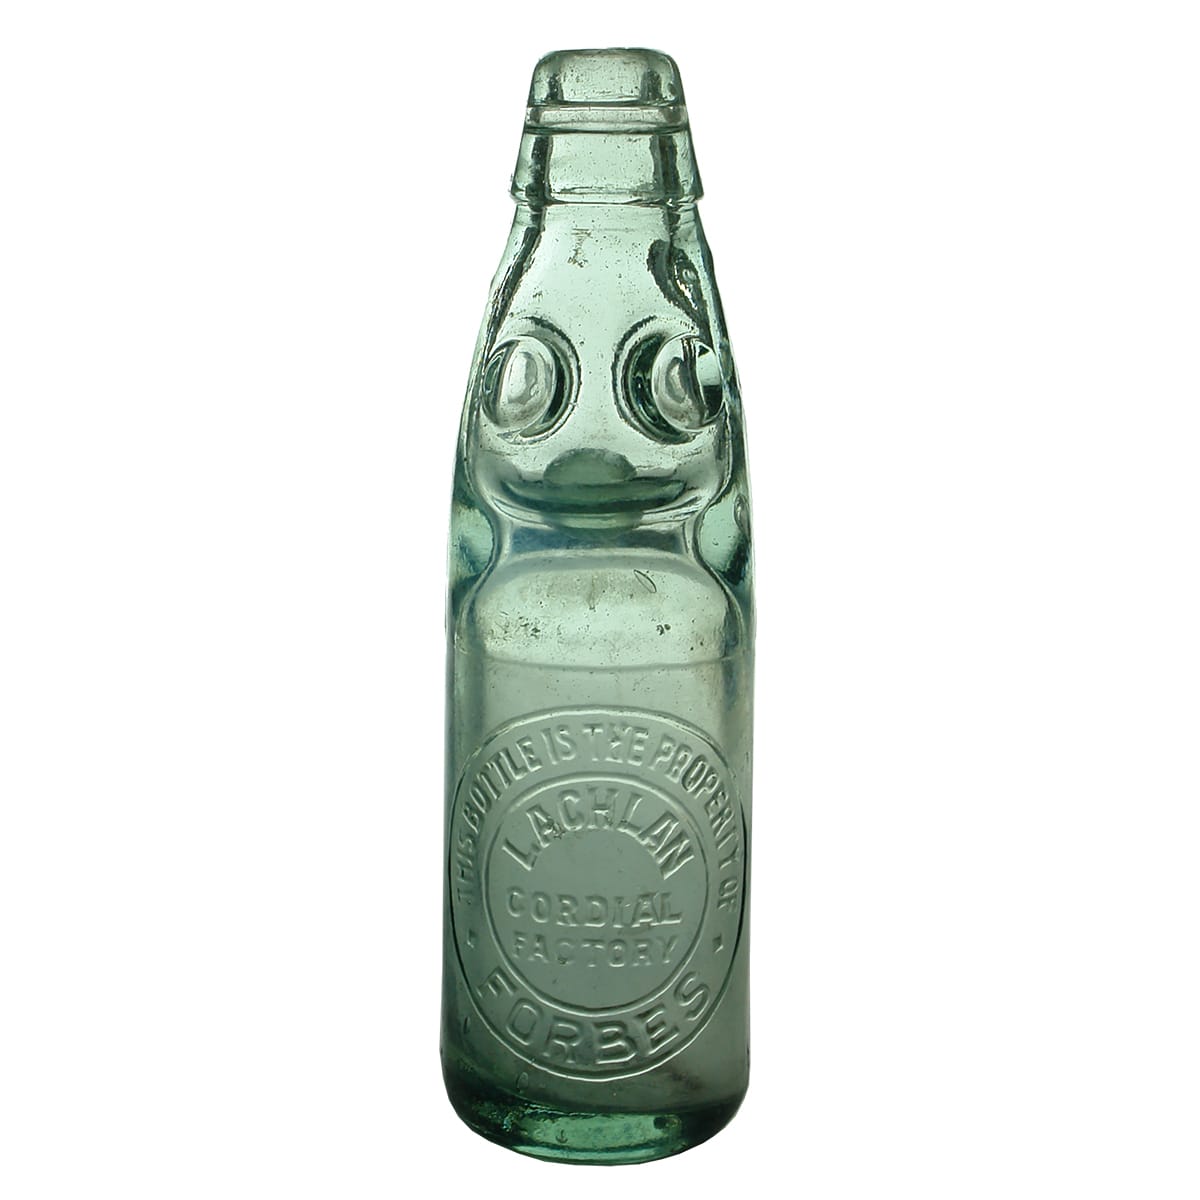 Codd. Lachlan Cordial Factory, Forbes. Dobson. Aqua. 6 oz. (New South Wales)